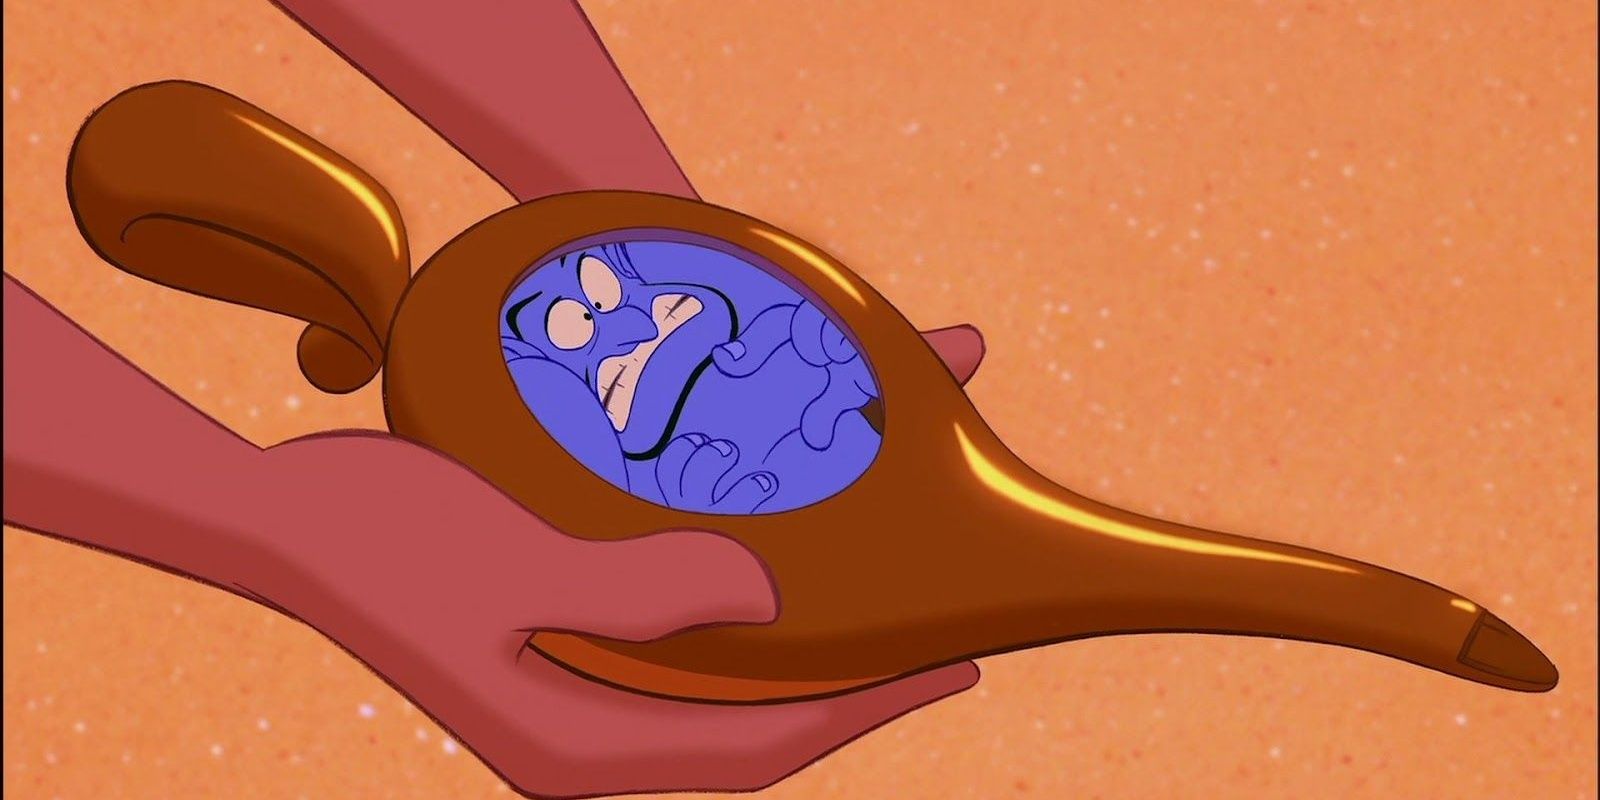 Genie demonstrating how small his lamp is by squishing himself into it in the animated Aladdin movie